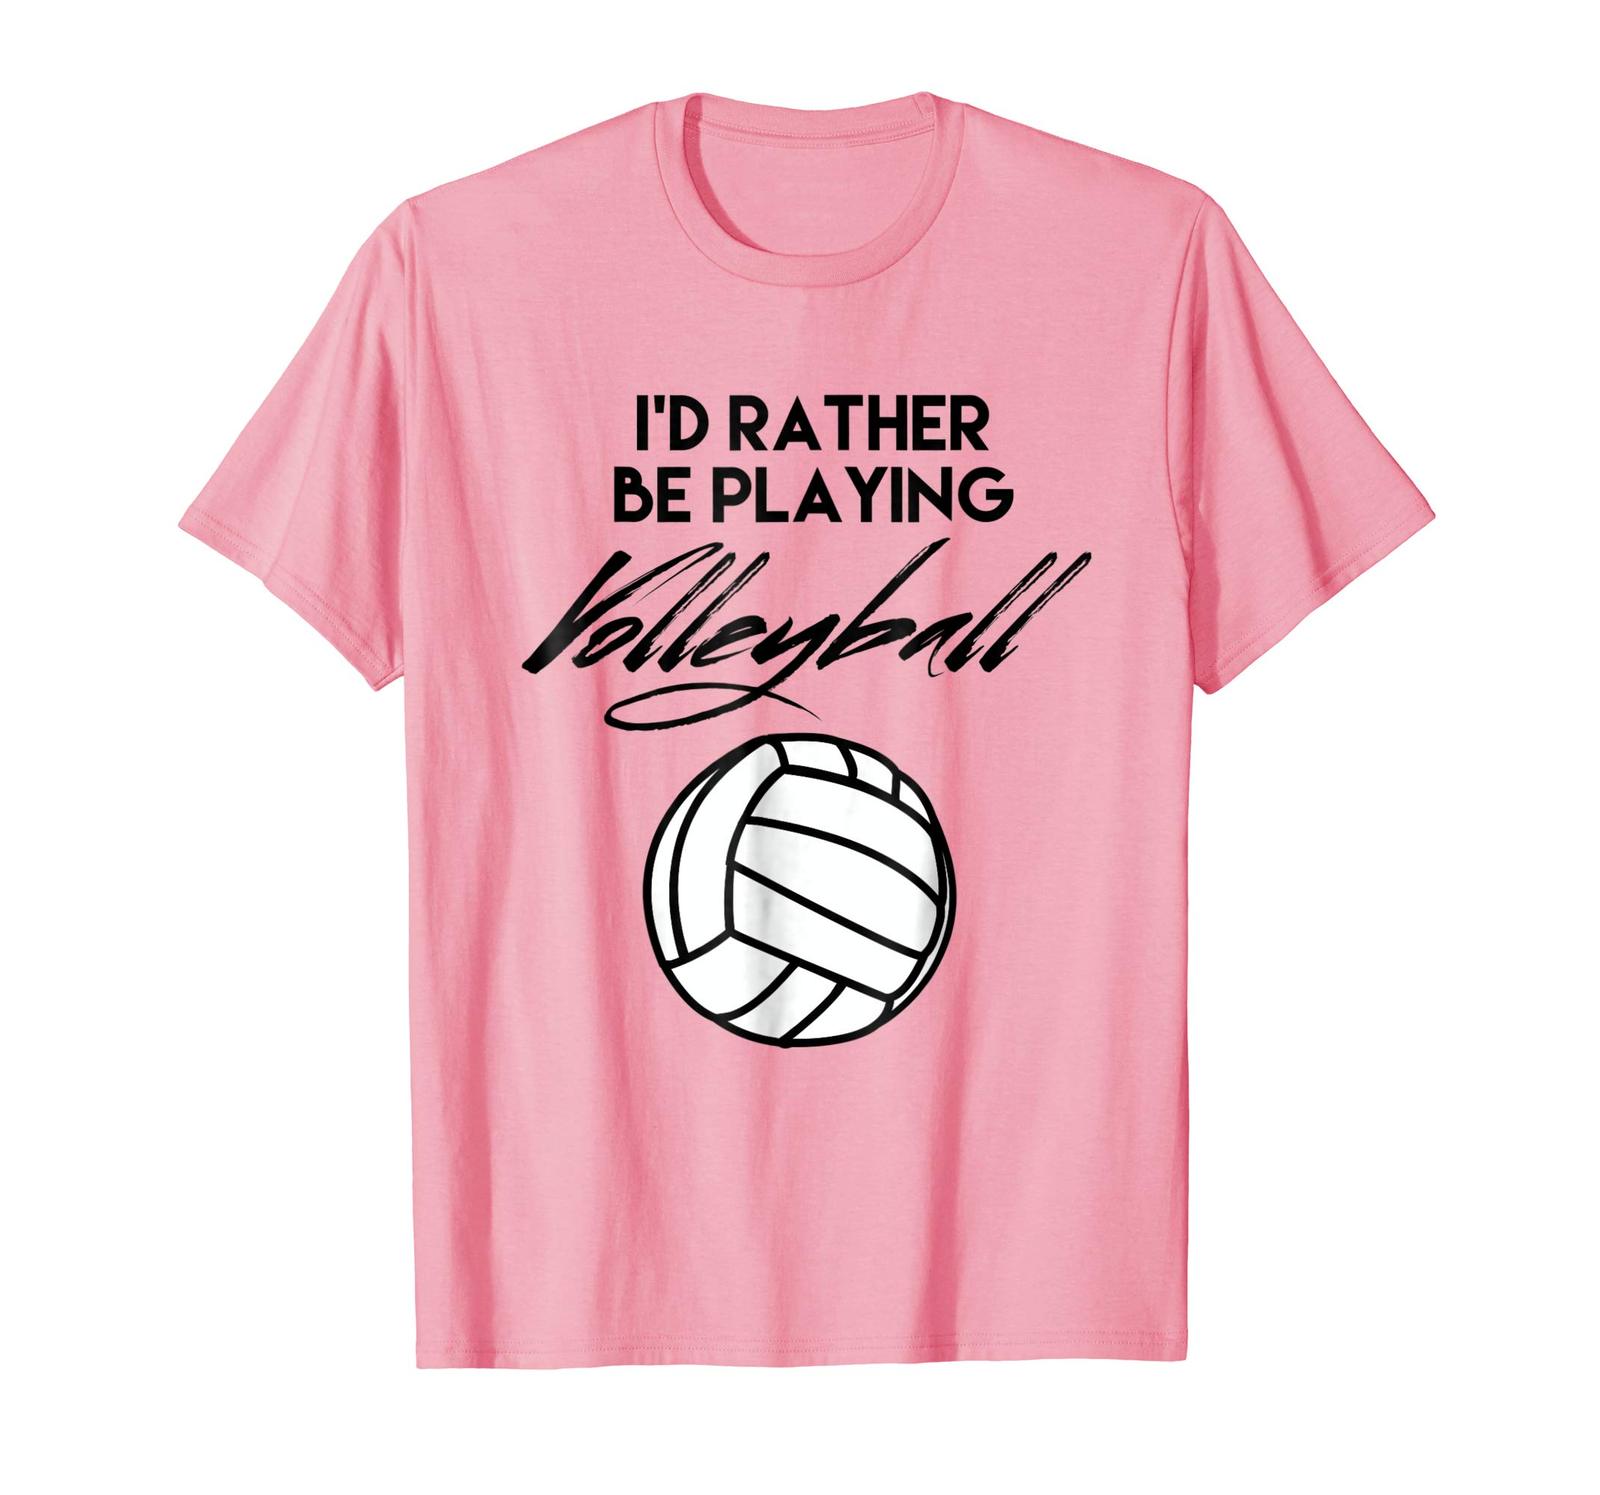 New Shirts - Funny Volleyball Shirt - I'd Rather Be Playing Volleyball ...